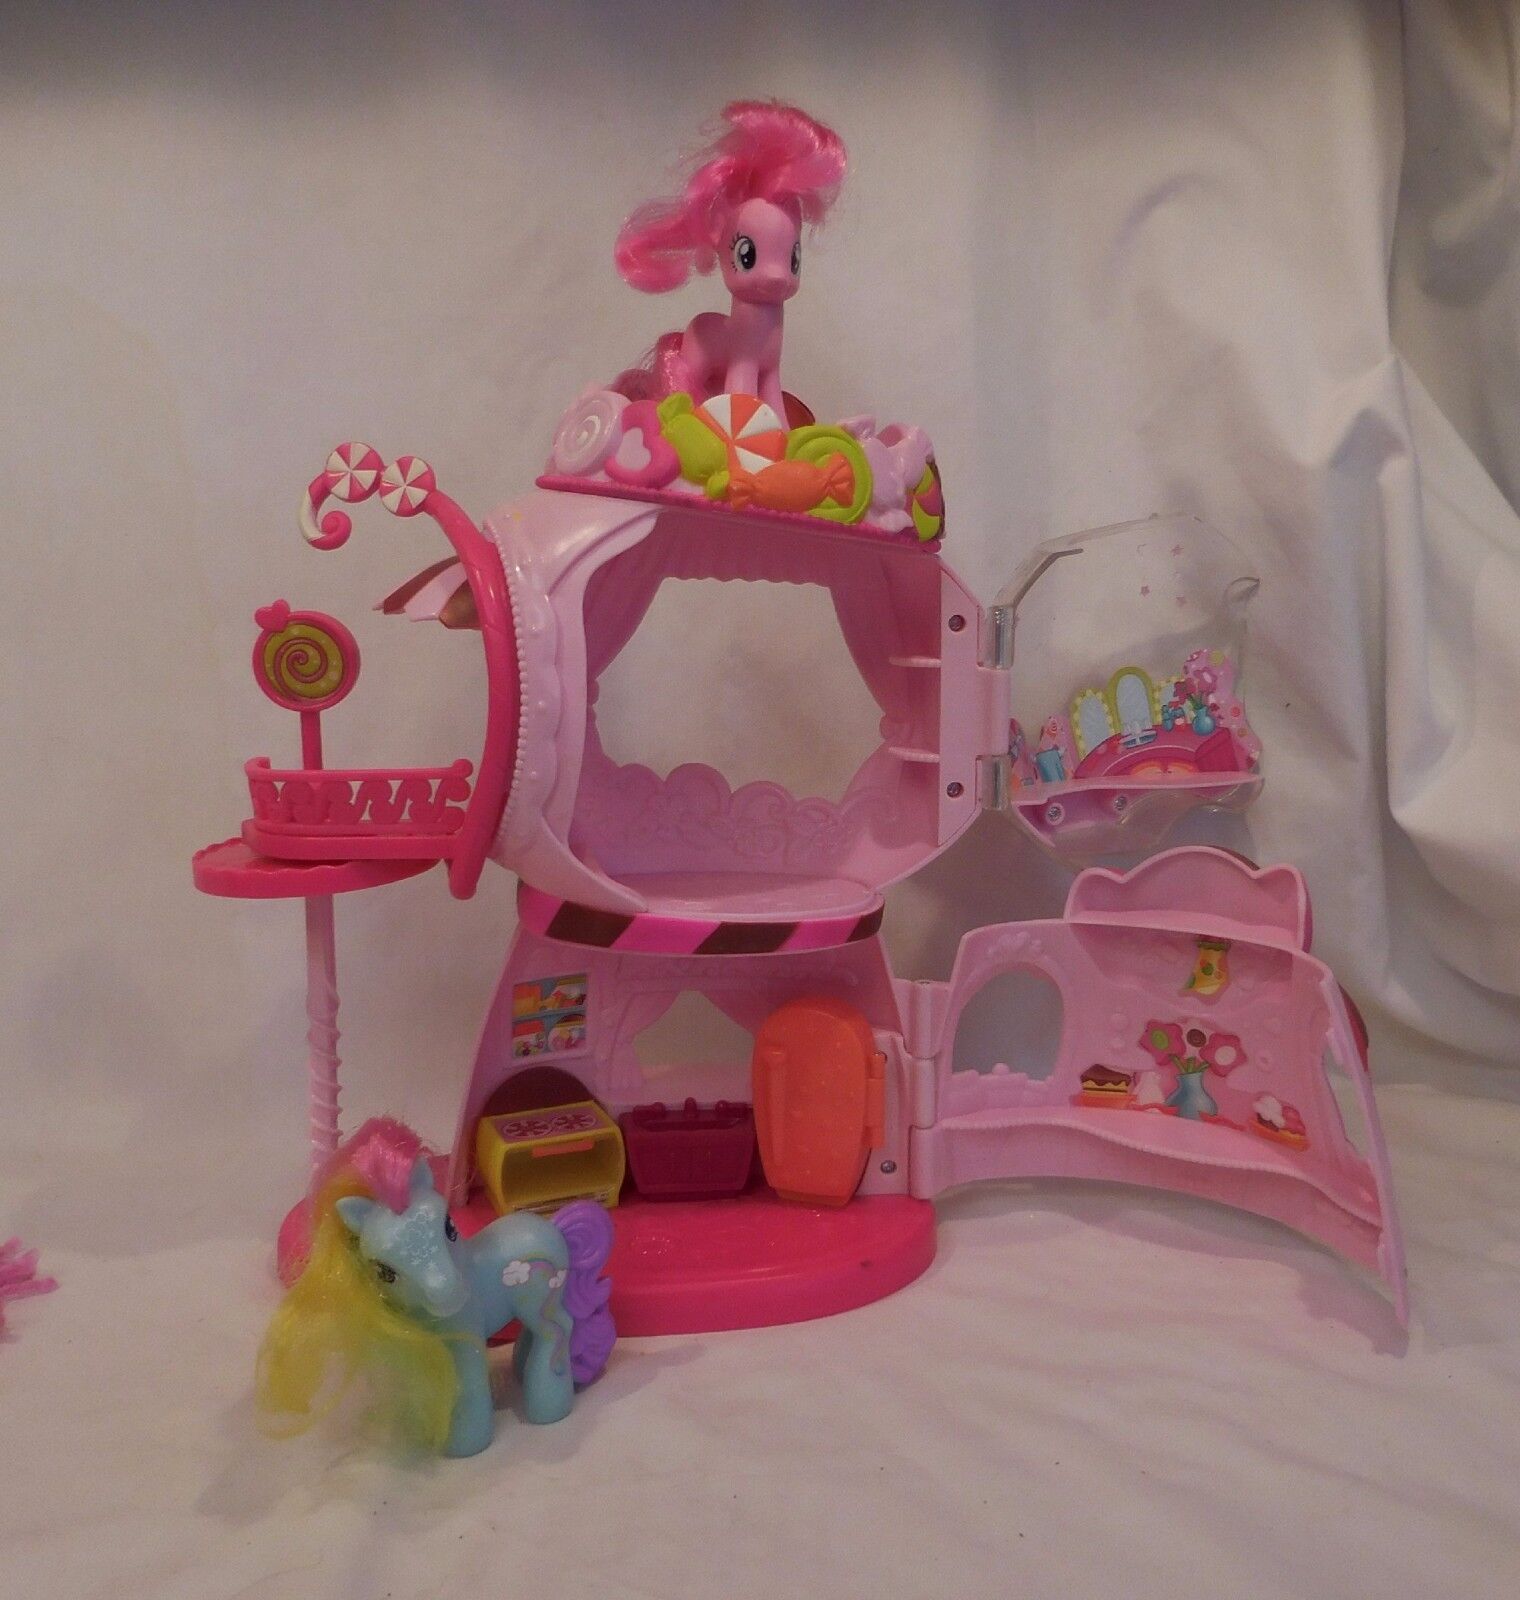 Hasbro 2008 My Little Pony Sweet Belle's Gumball Toy House Plays Music plus Pony - $21.79